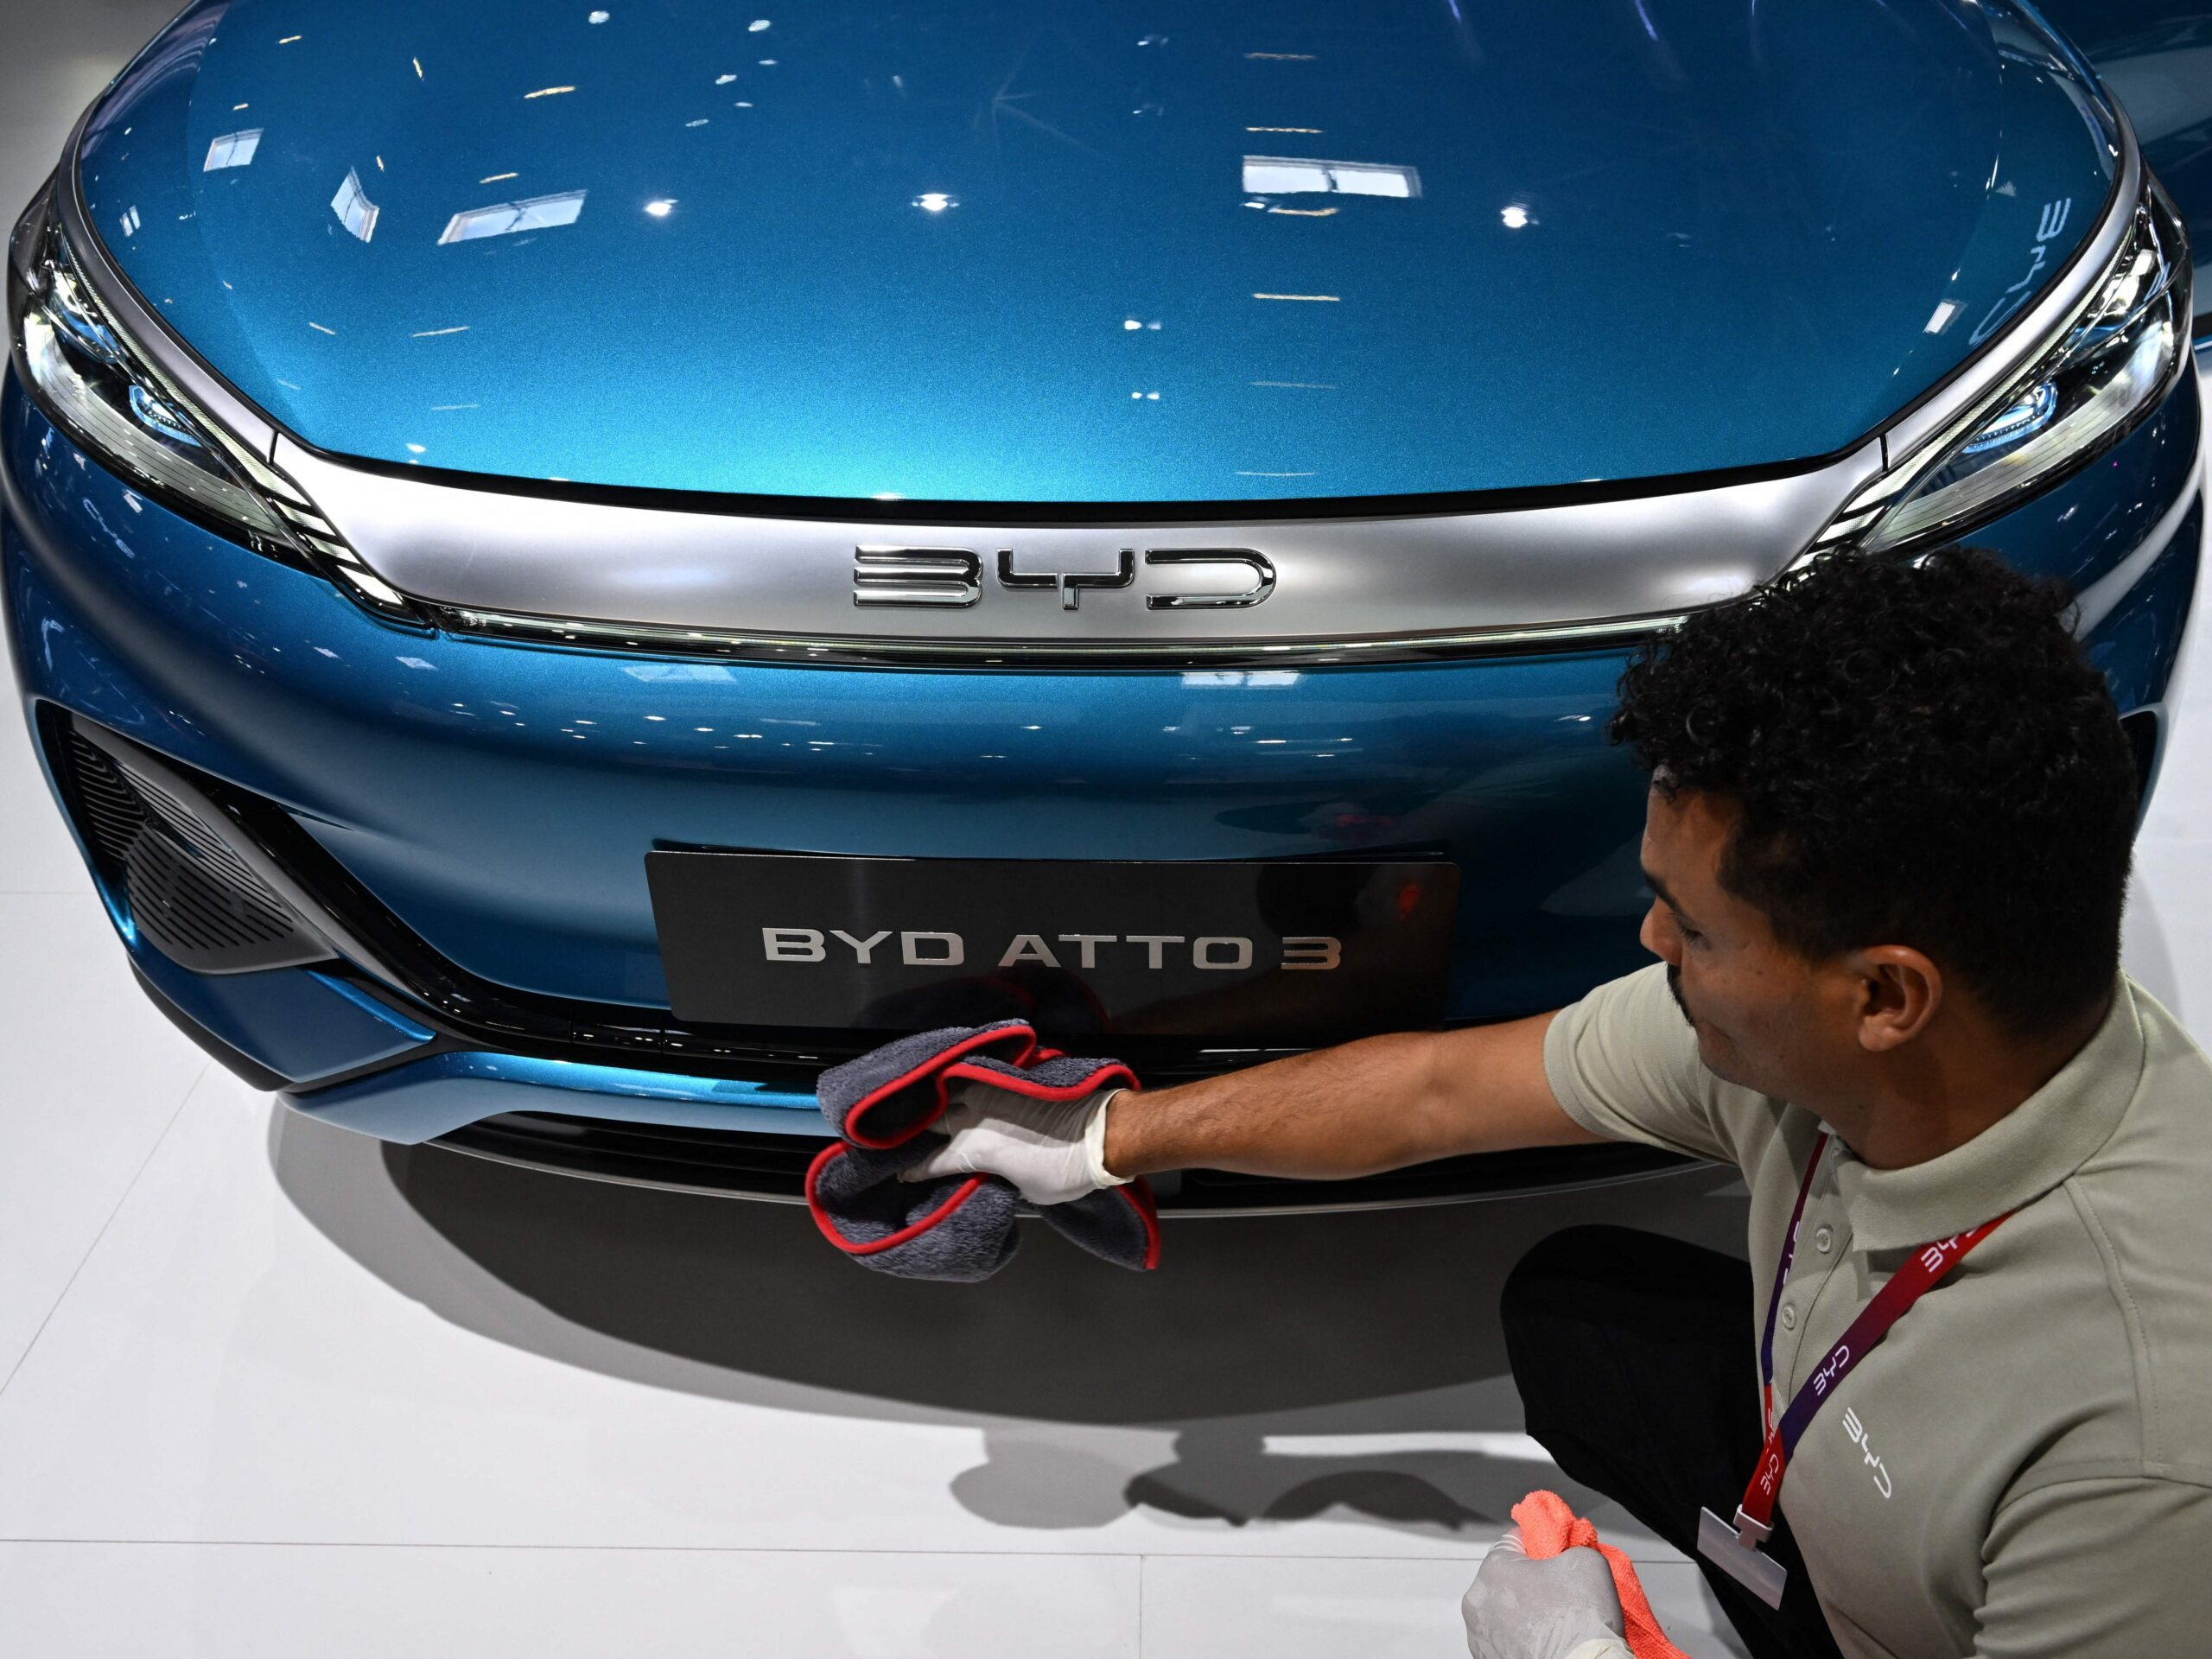 Chinese electric carmakers are taking on Europeans on their own turf — and succeeding